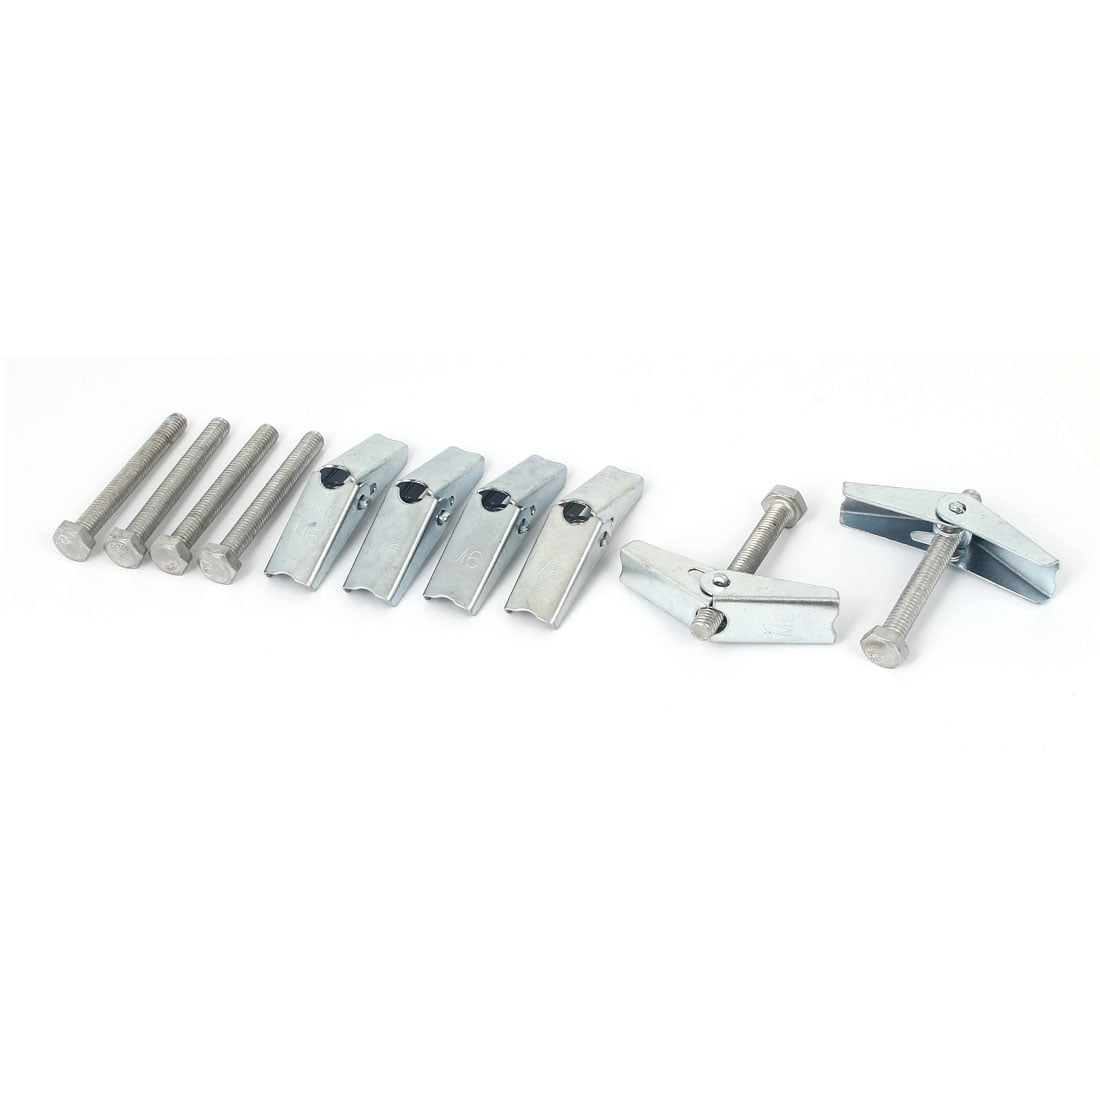 CAVITY WALL ANCHORS PLASTERBOARD SPRING TOGGLE FIXINGS WITH SCREWS 